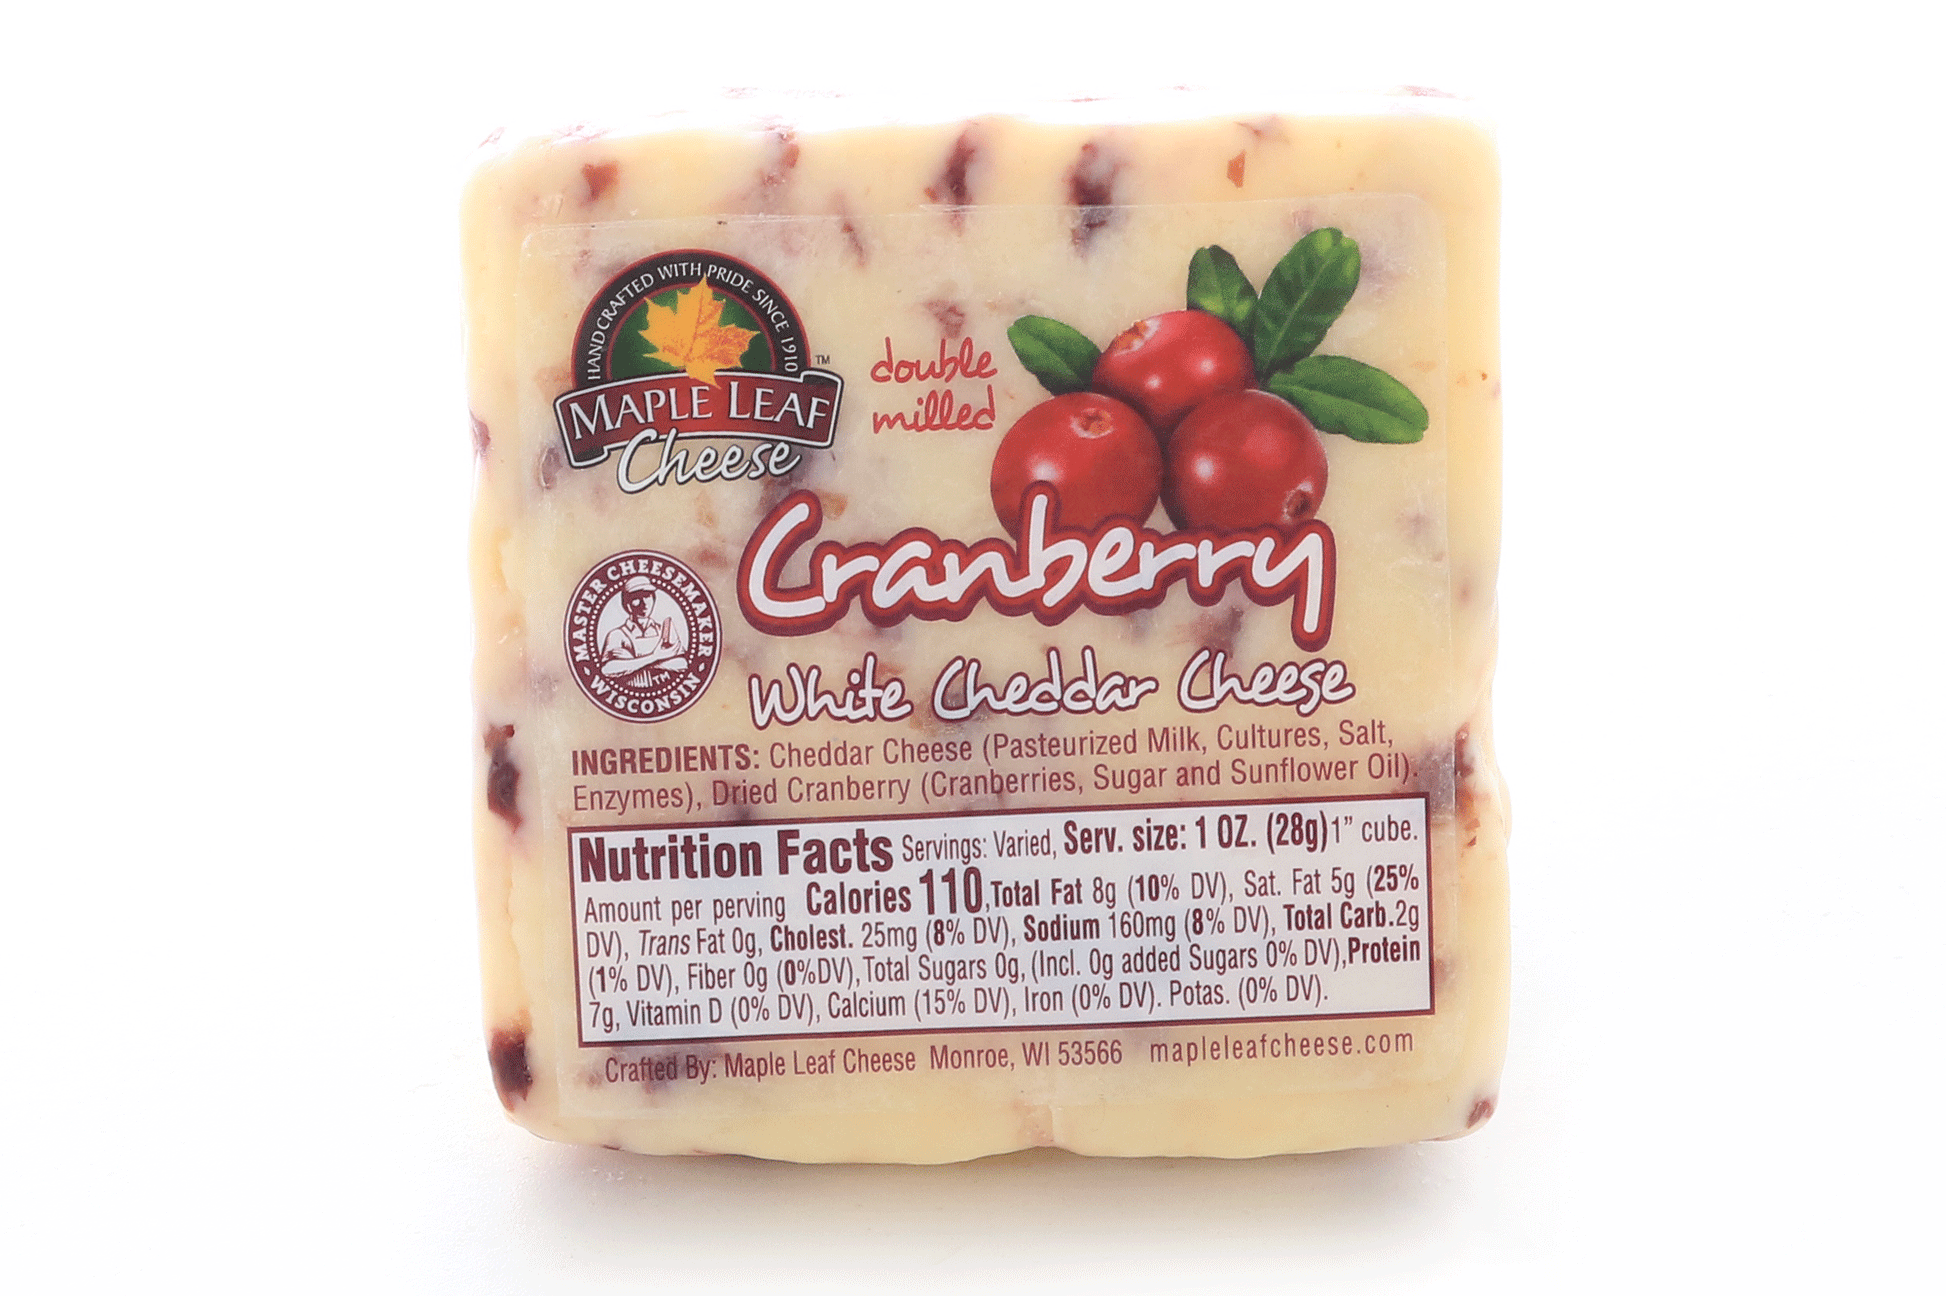 8 ounce piece of white cheddar cheese with cranberries